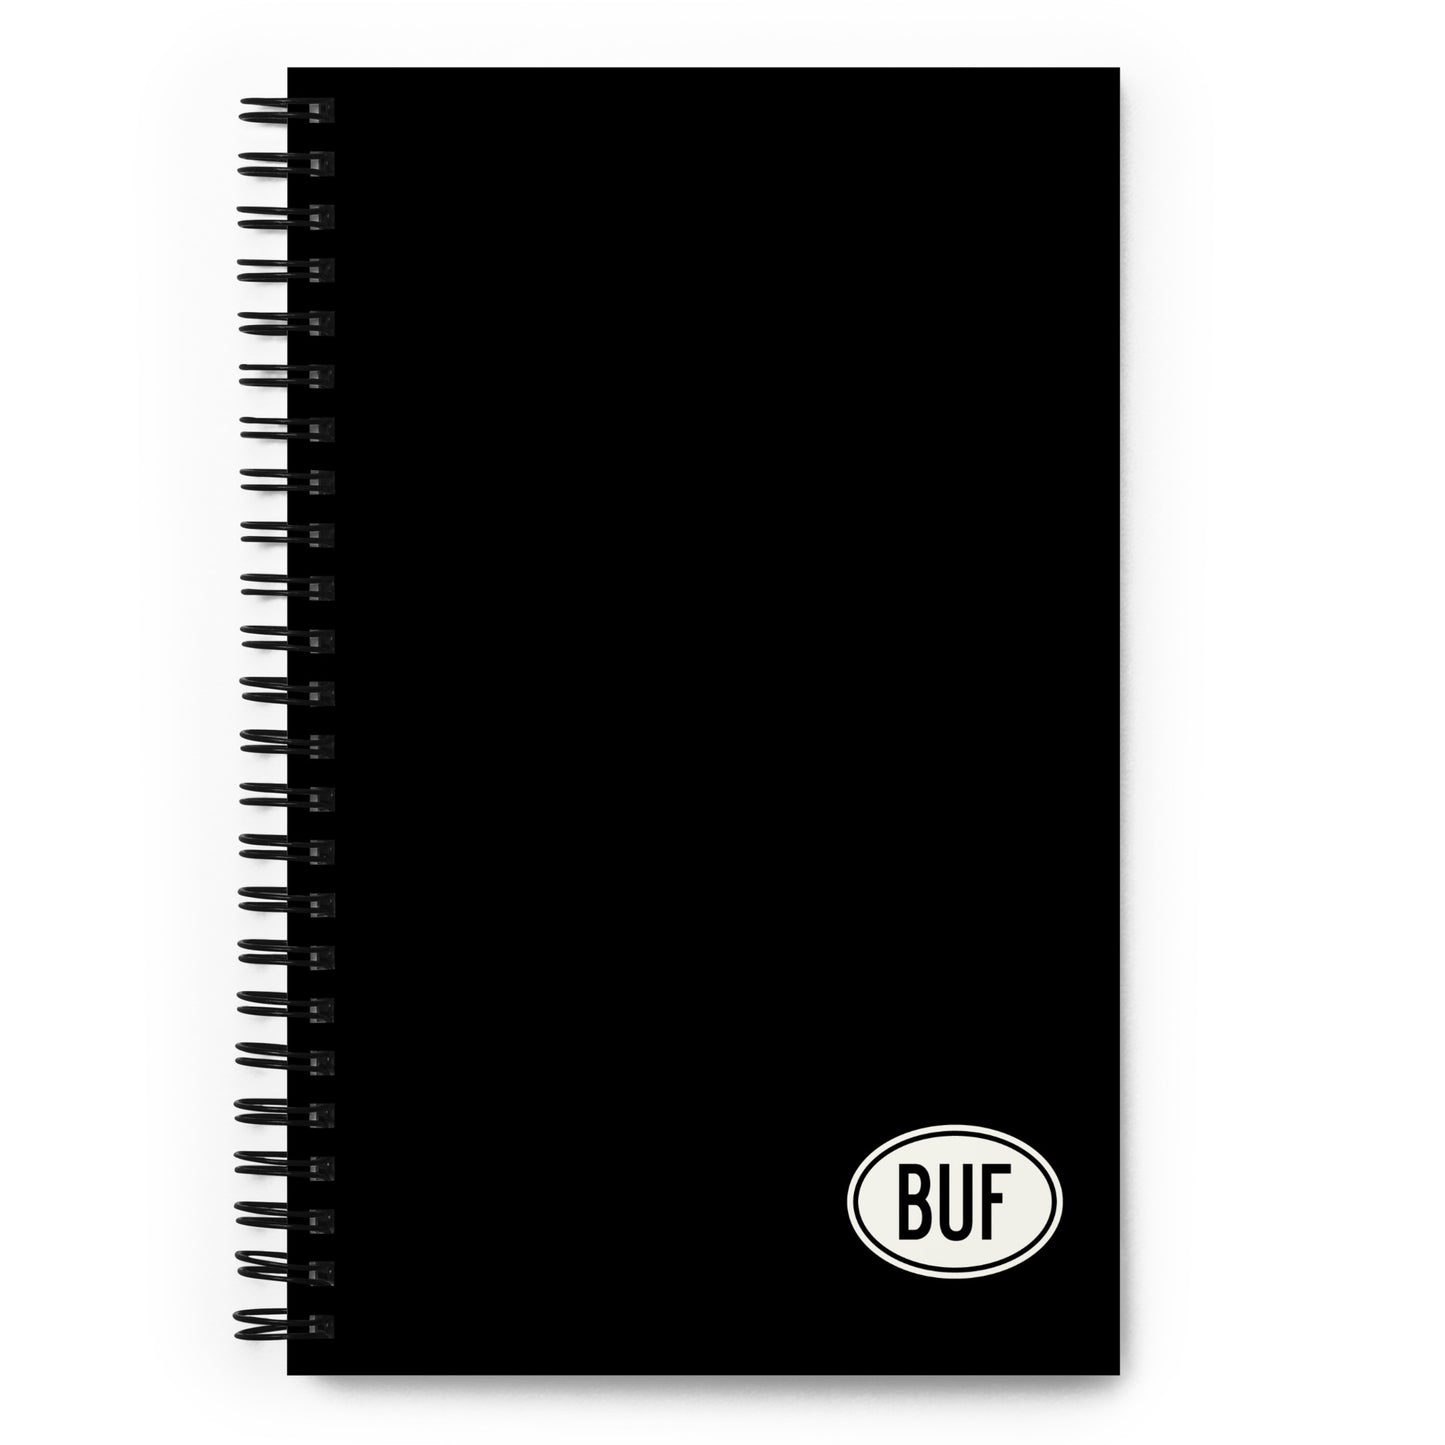 Unique Travel Gift Spiral Notebook - White Oval • BUF Buffalo • YHM Designs - Image 01